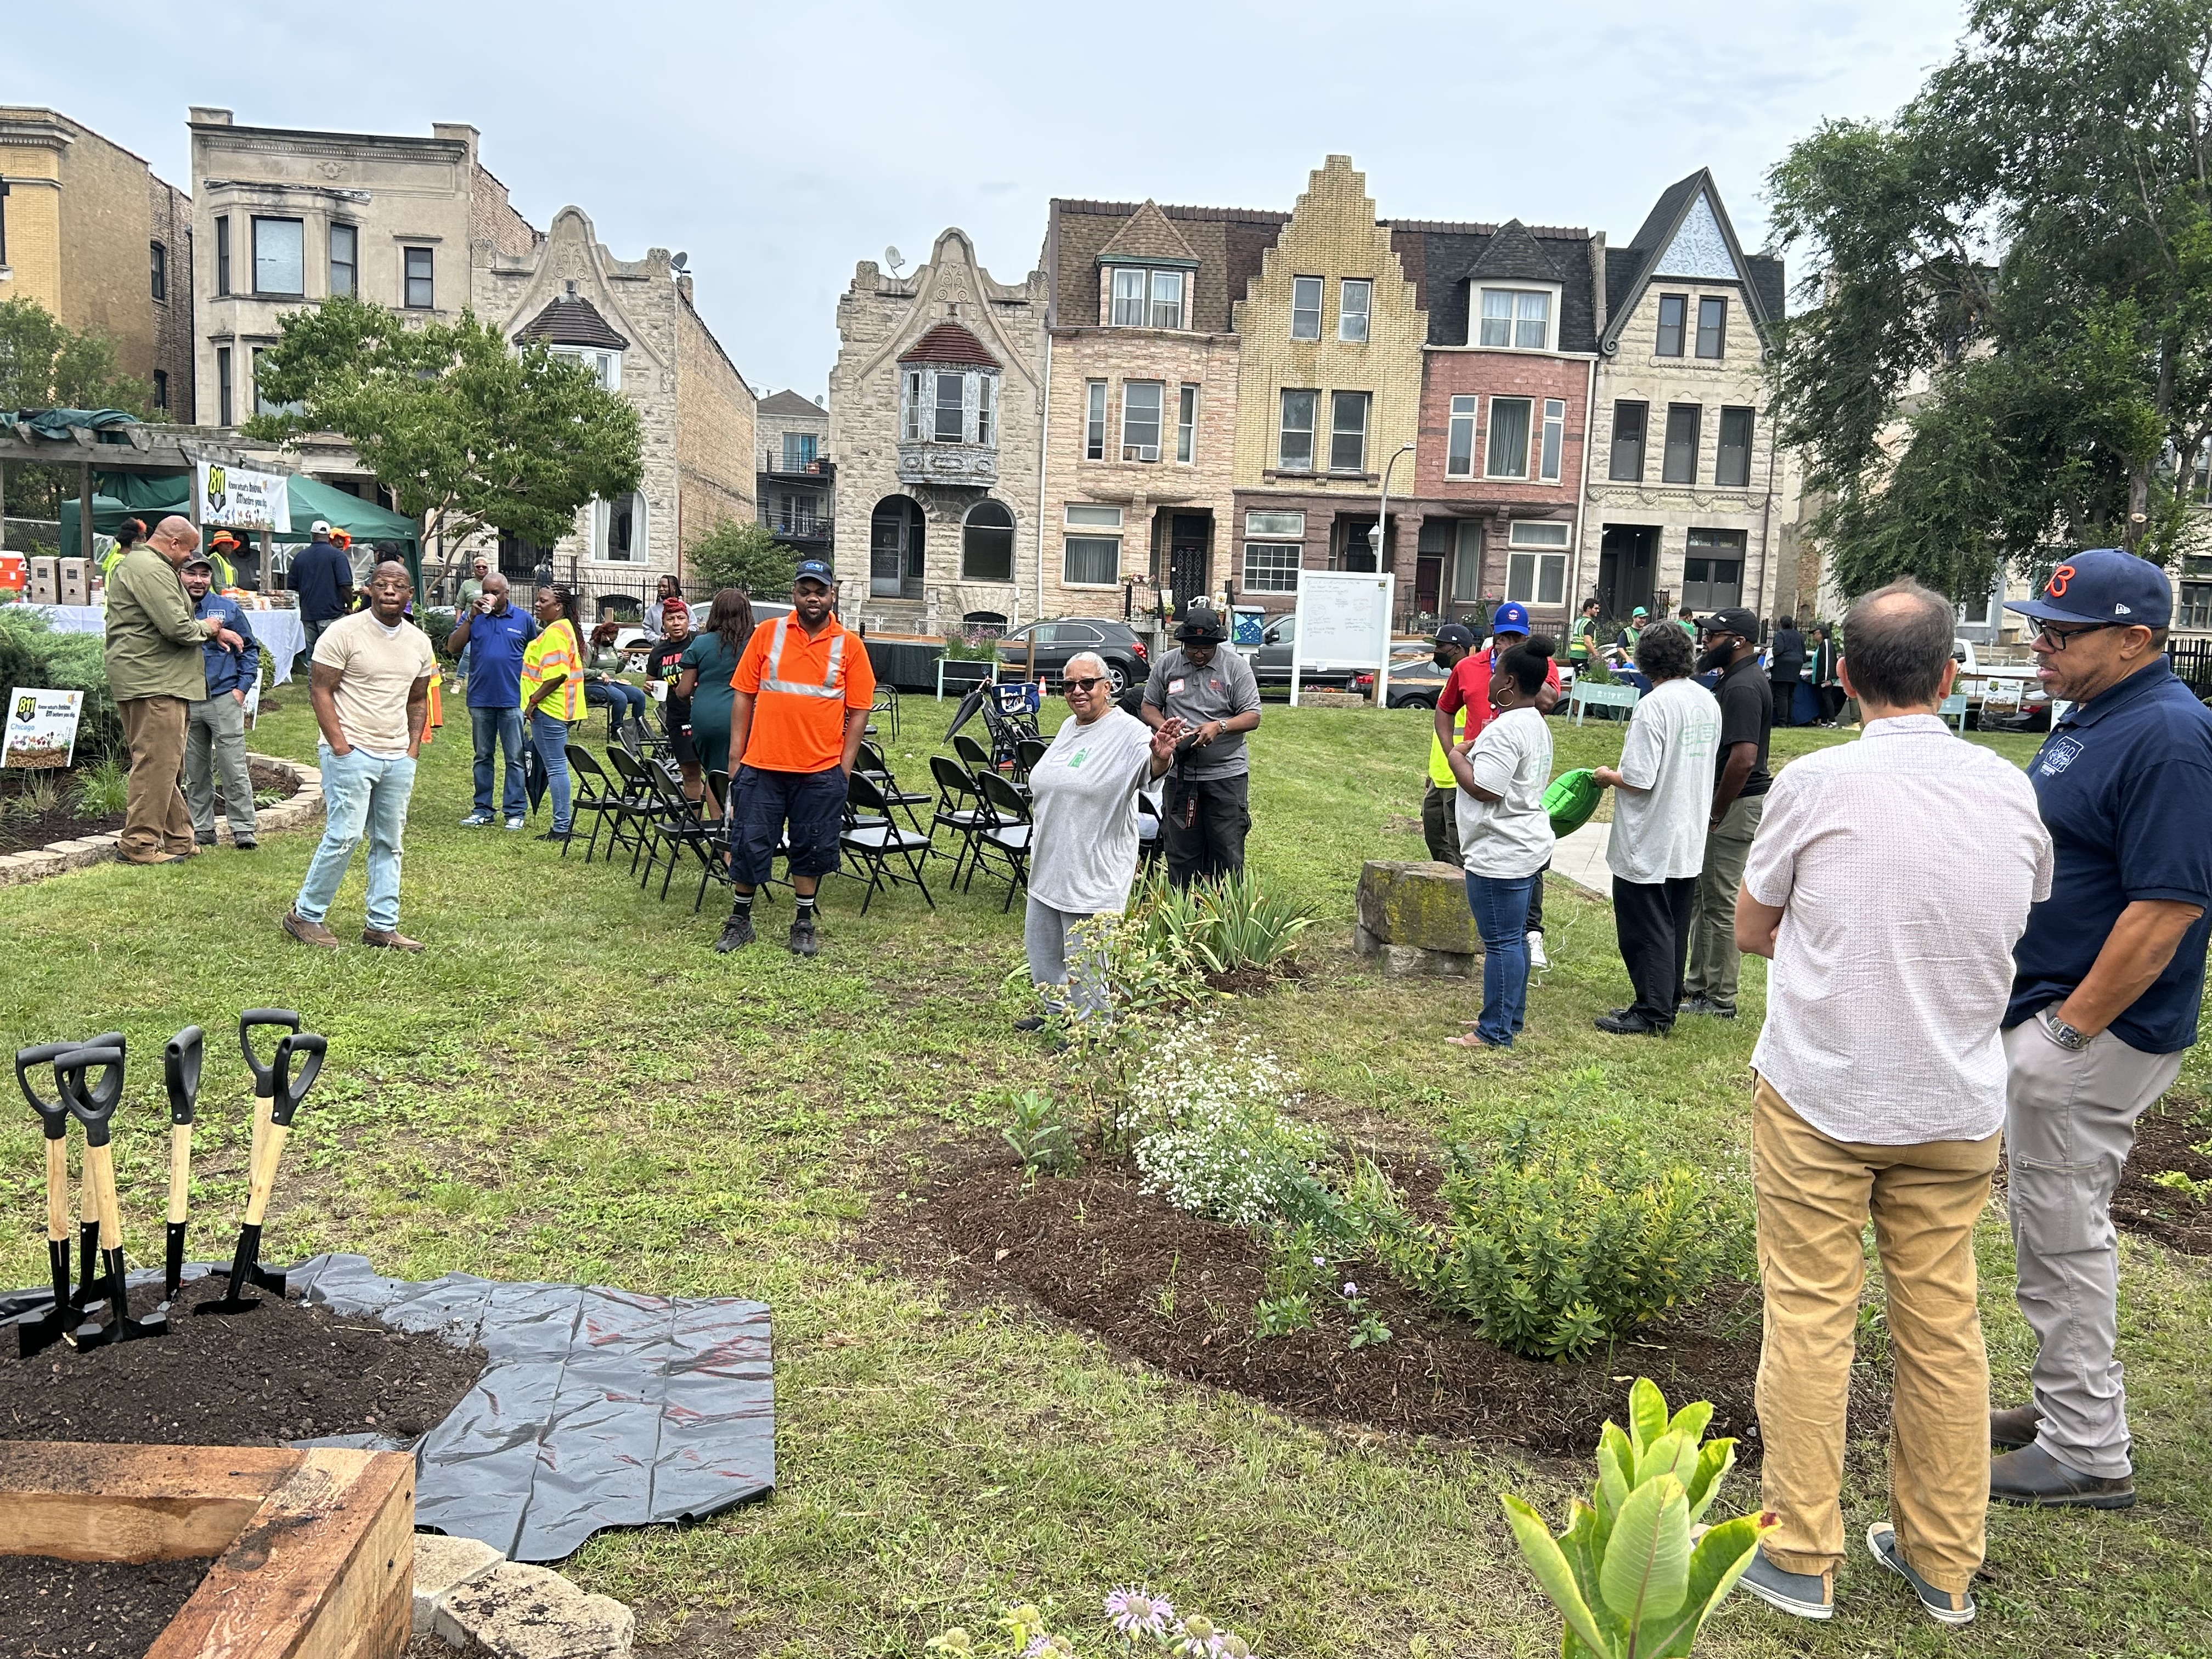 A group of about 25 standing and mingling in the community garden